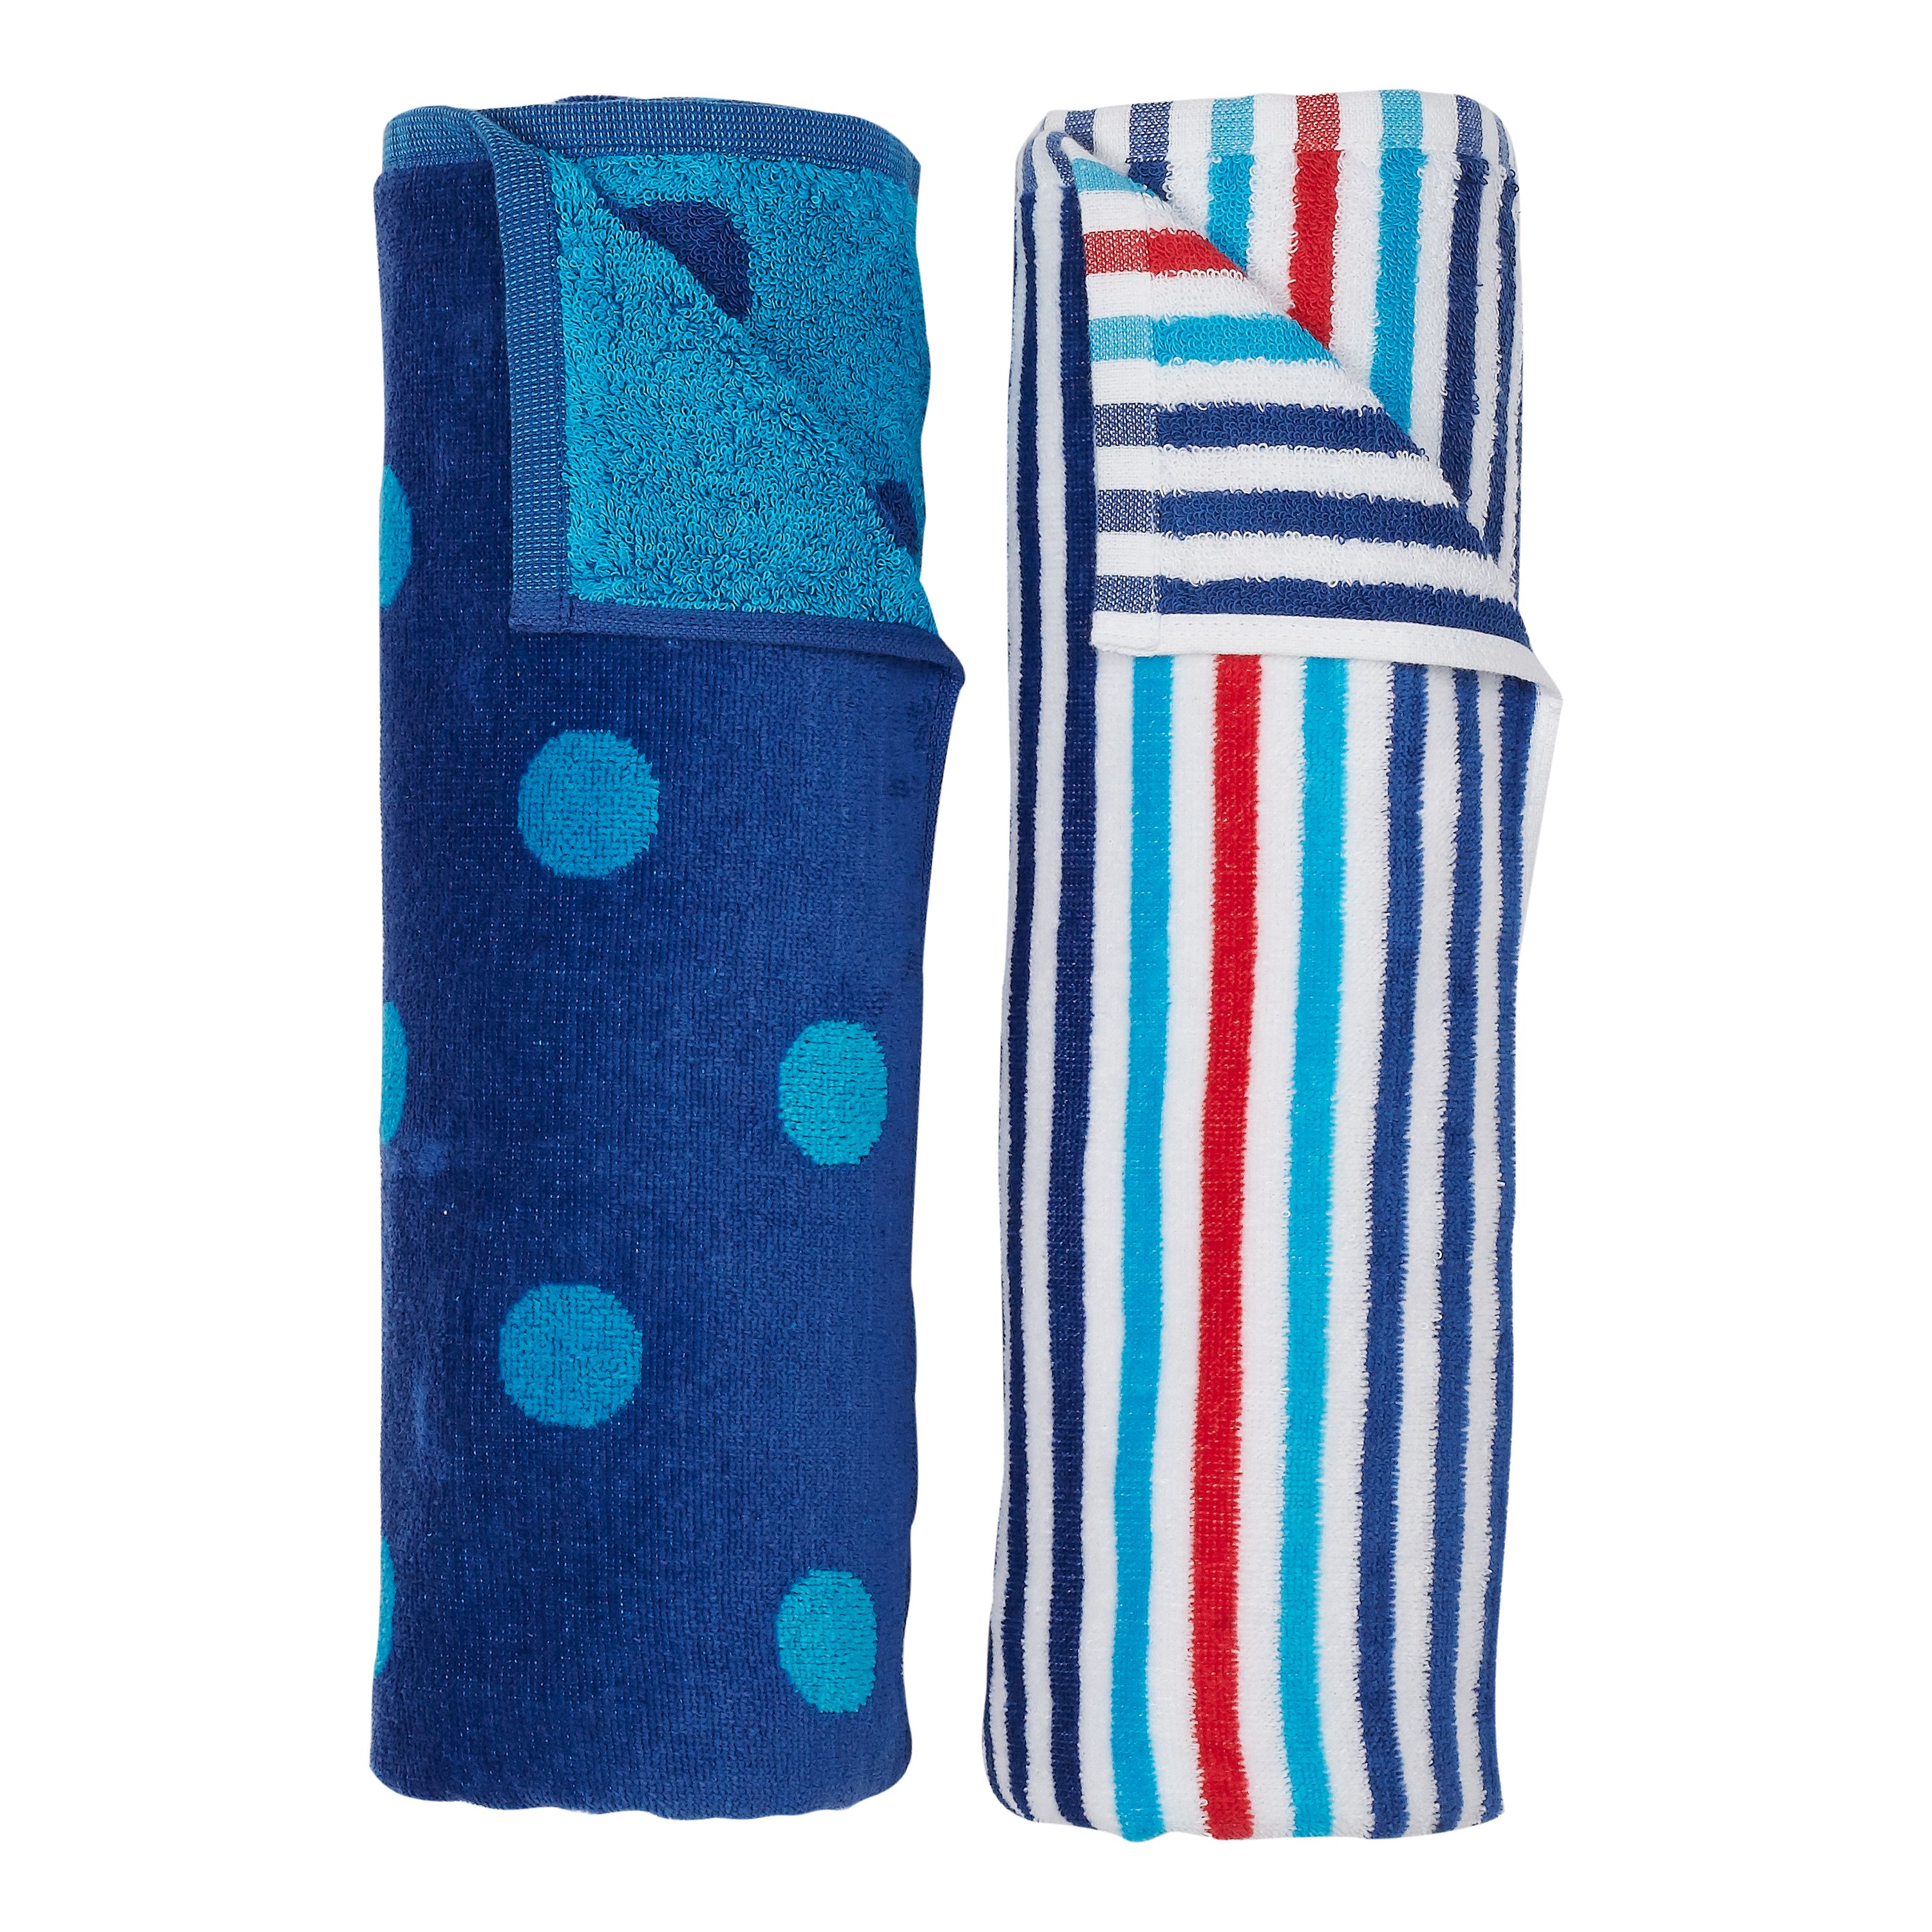 Mainstays Stripe and Polka Dot Reversible Cotton Beach Towel, 2 Pack - image 2 of 4